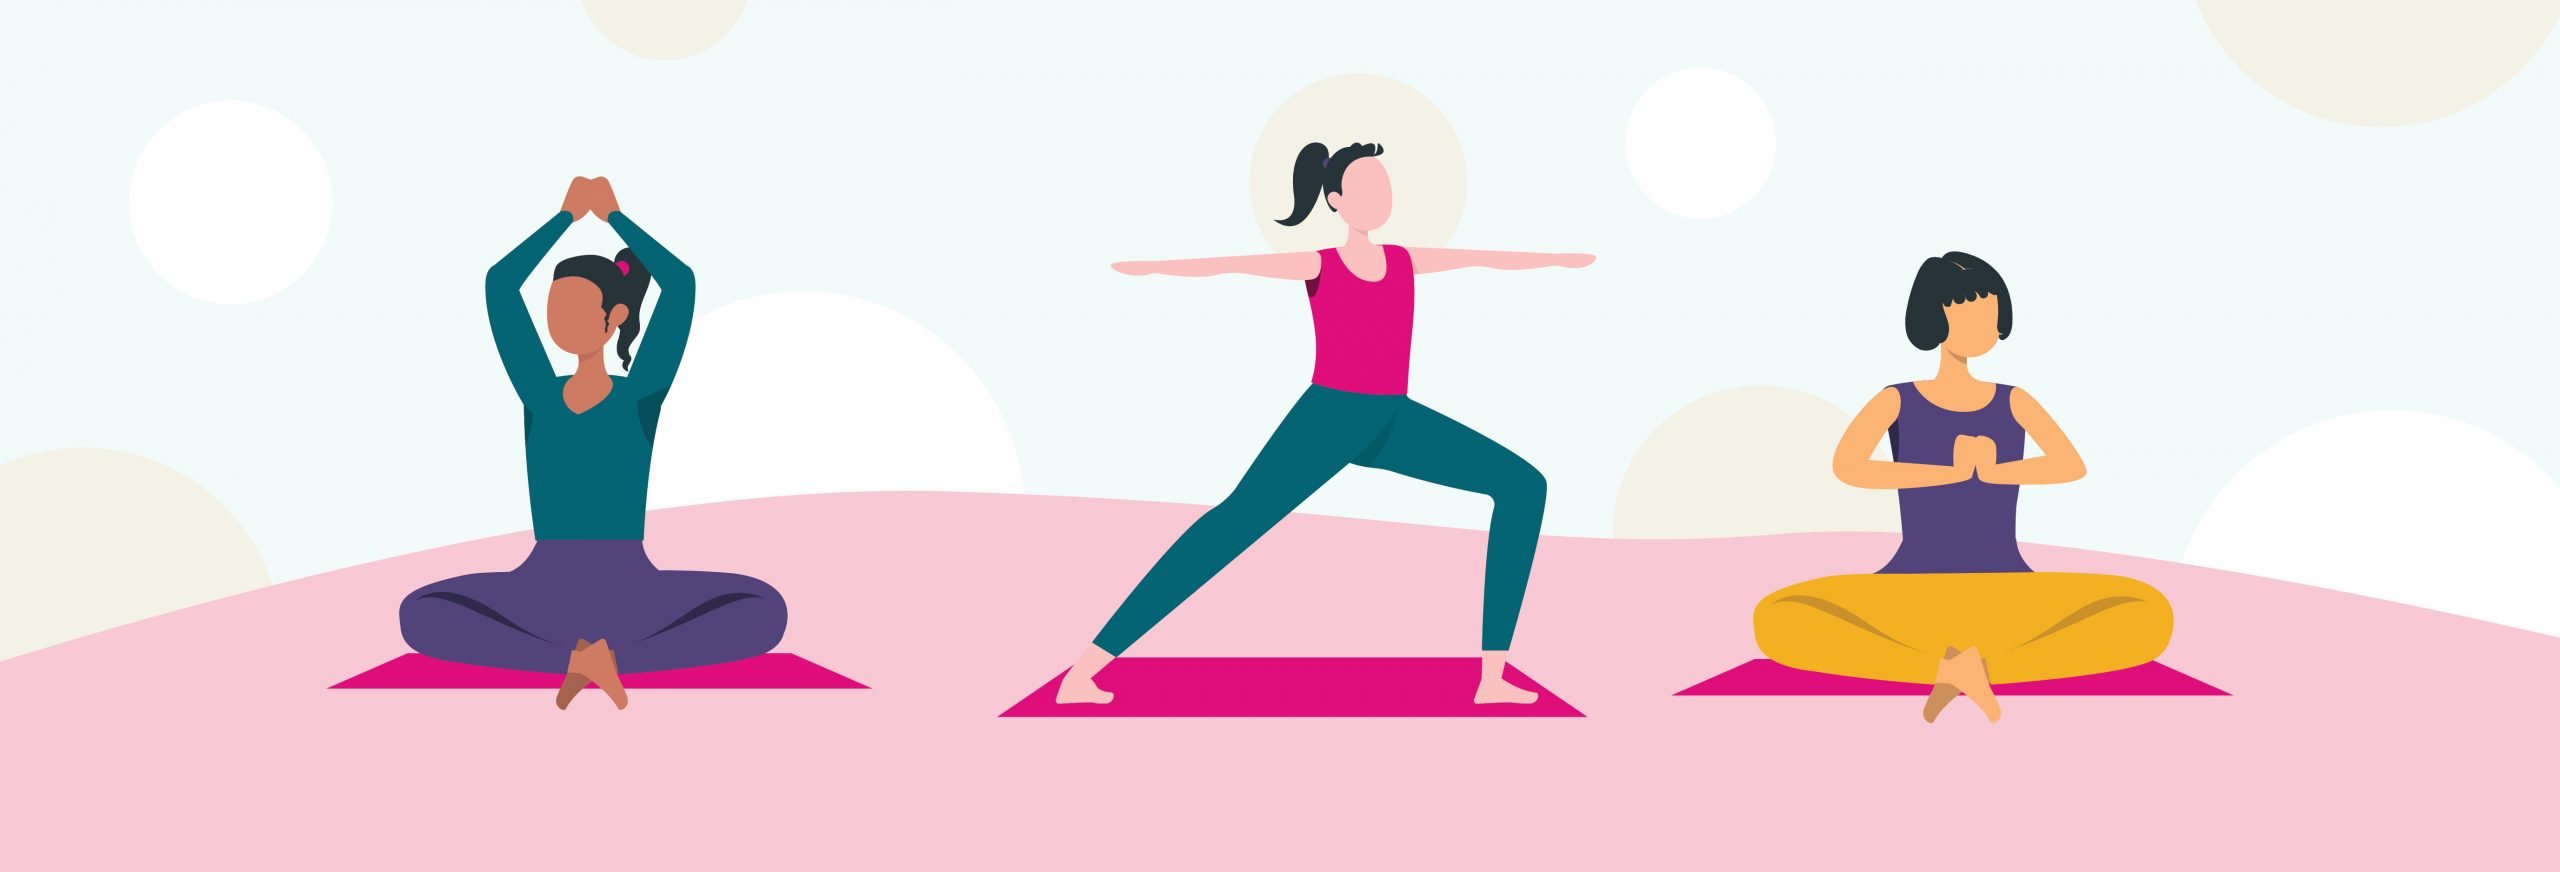 Texas Wings - Gentle exercise after breast cancer surgery, chemotherapy,  and radiation is key to a successful recovery and can provide a sense of  normalcy for many women. Yoga can not only